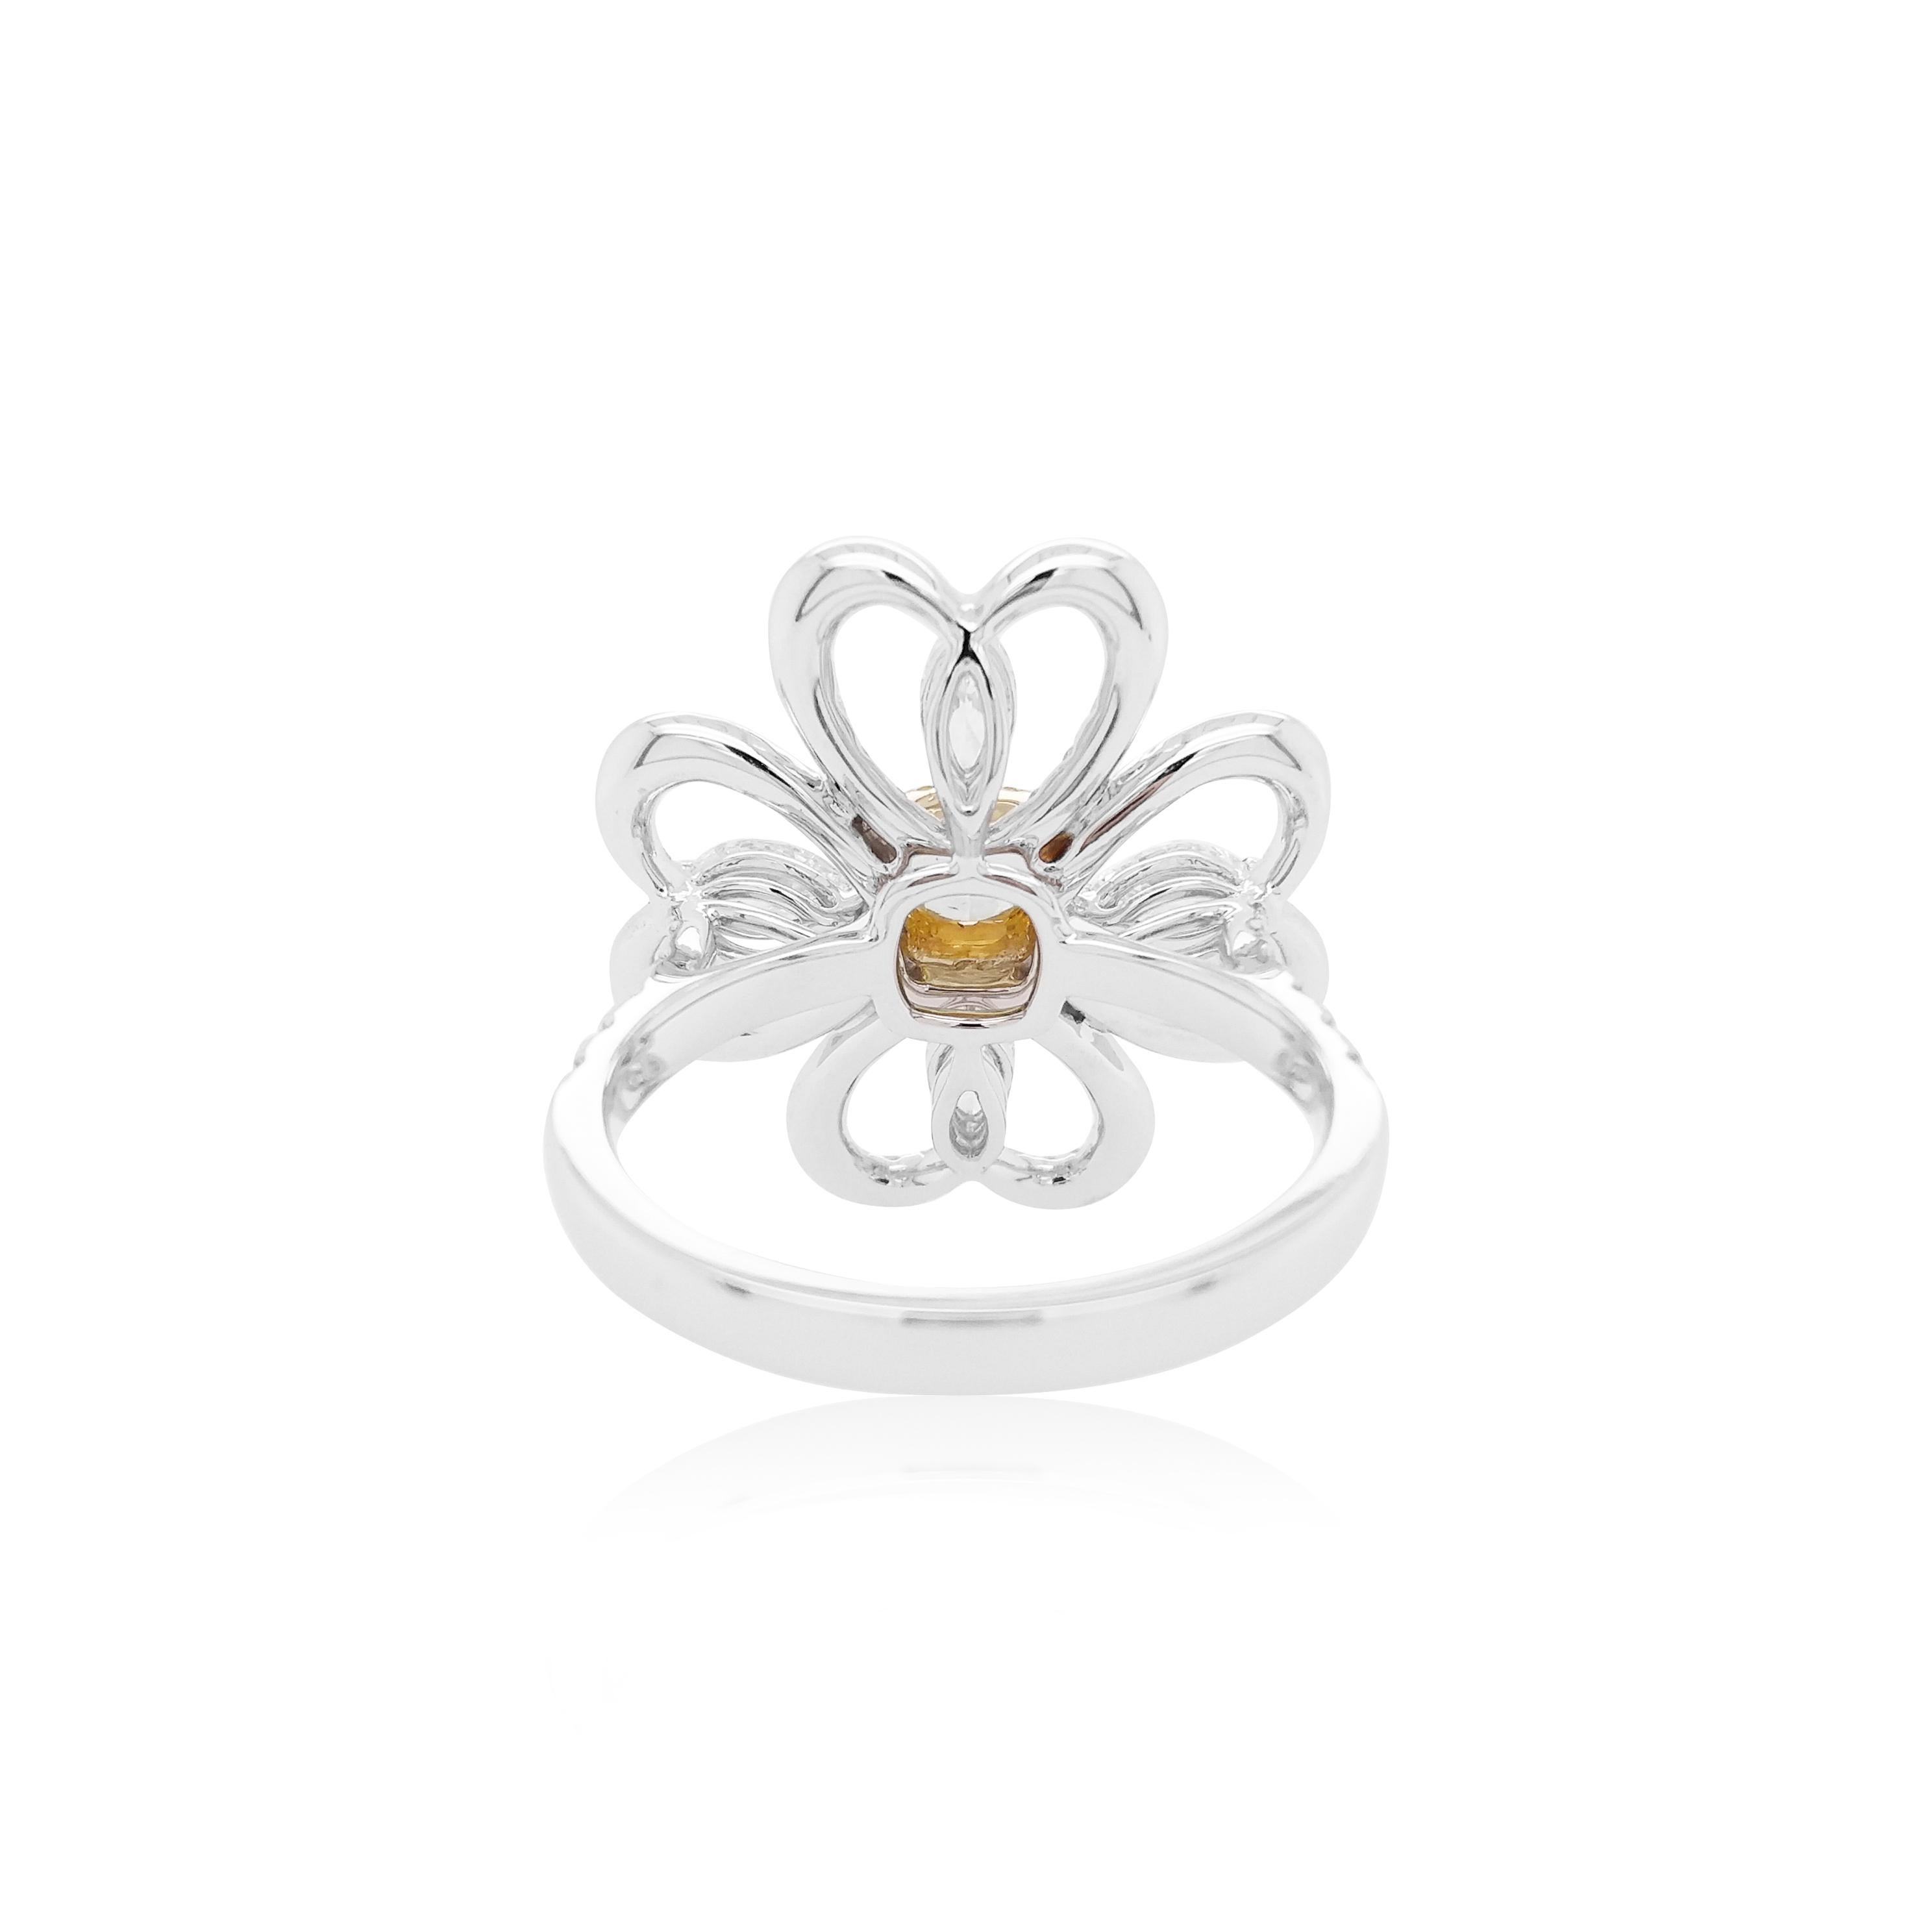 This contemporary 18K Gold ring features a natural Yellow Diamond set at its centre, with a halo of round brilliant-cut yellow diamonds. They are perfectly accentuated by the white diamond floral motif which surrounds it. Unique and striking, this